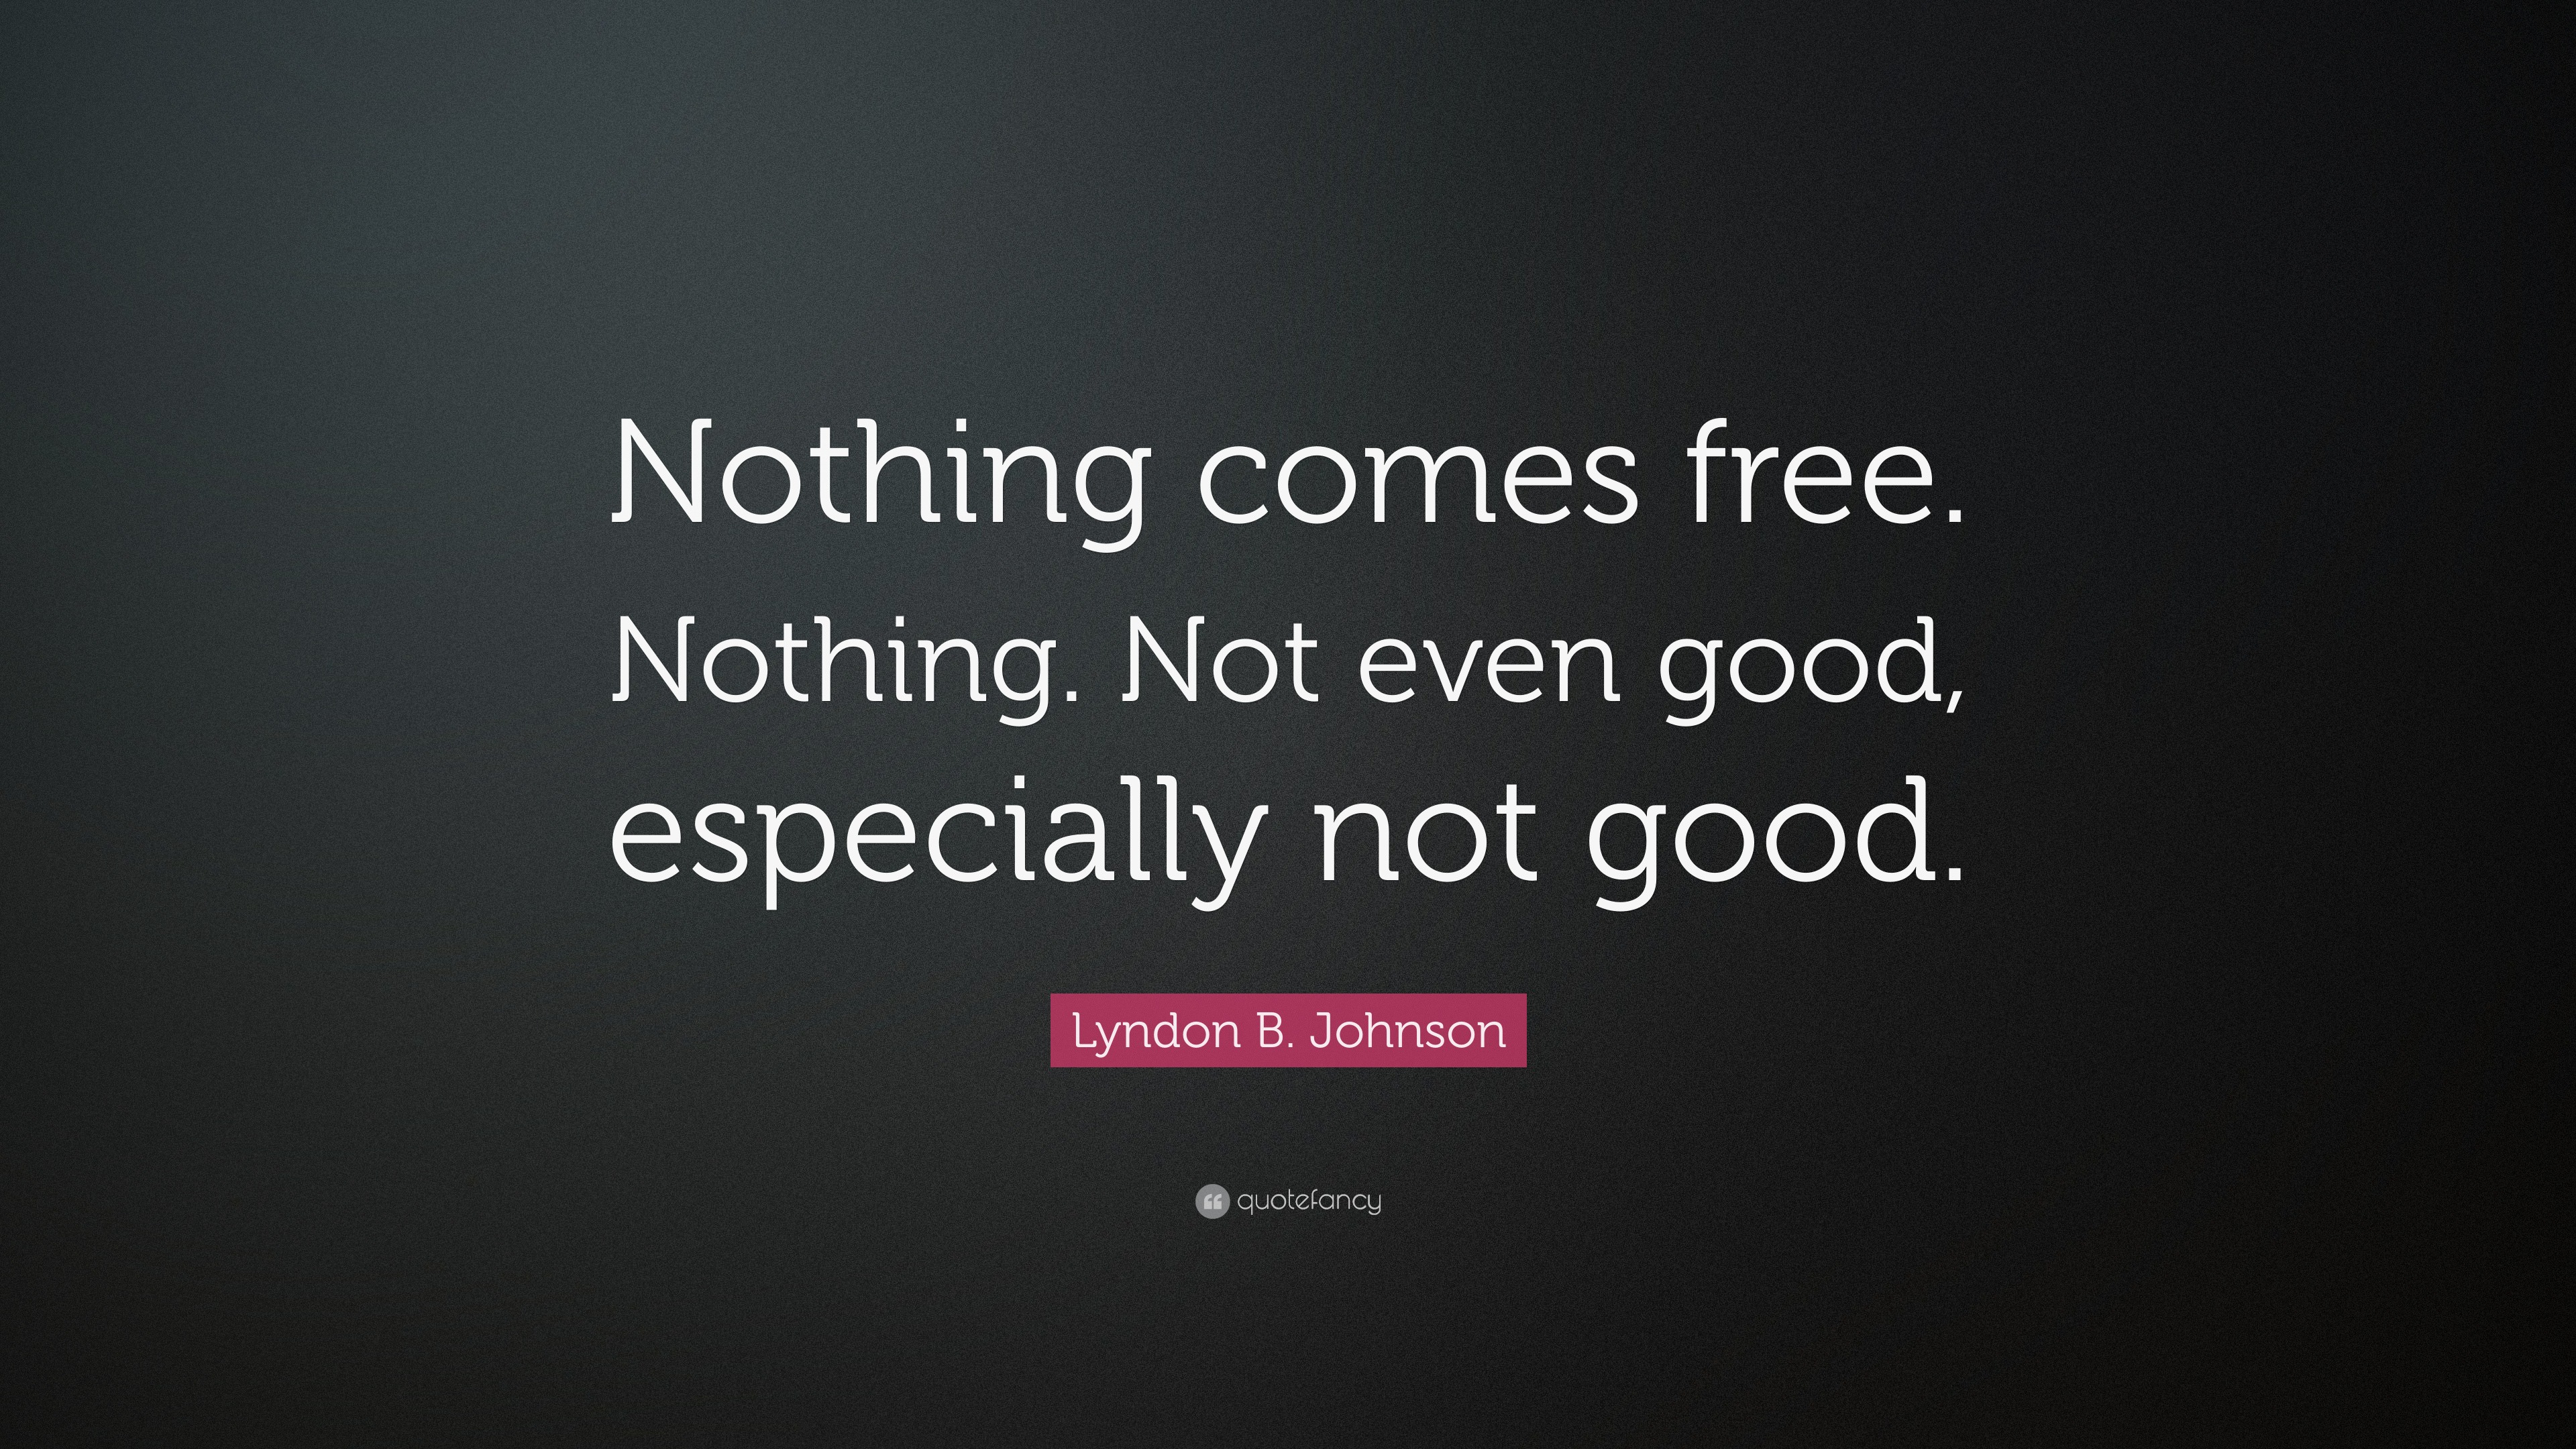 Lyndon B. Johnson Quote: “Nothing Comes Free. Nothing. Not Even Good, Especially Not Good.”